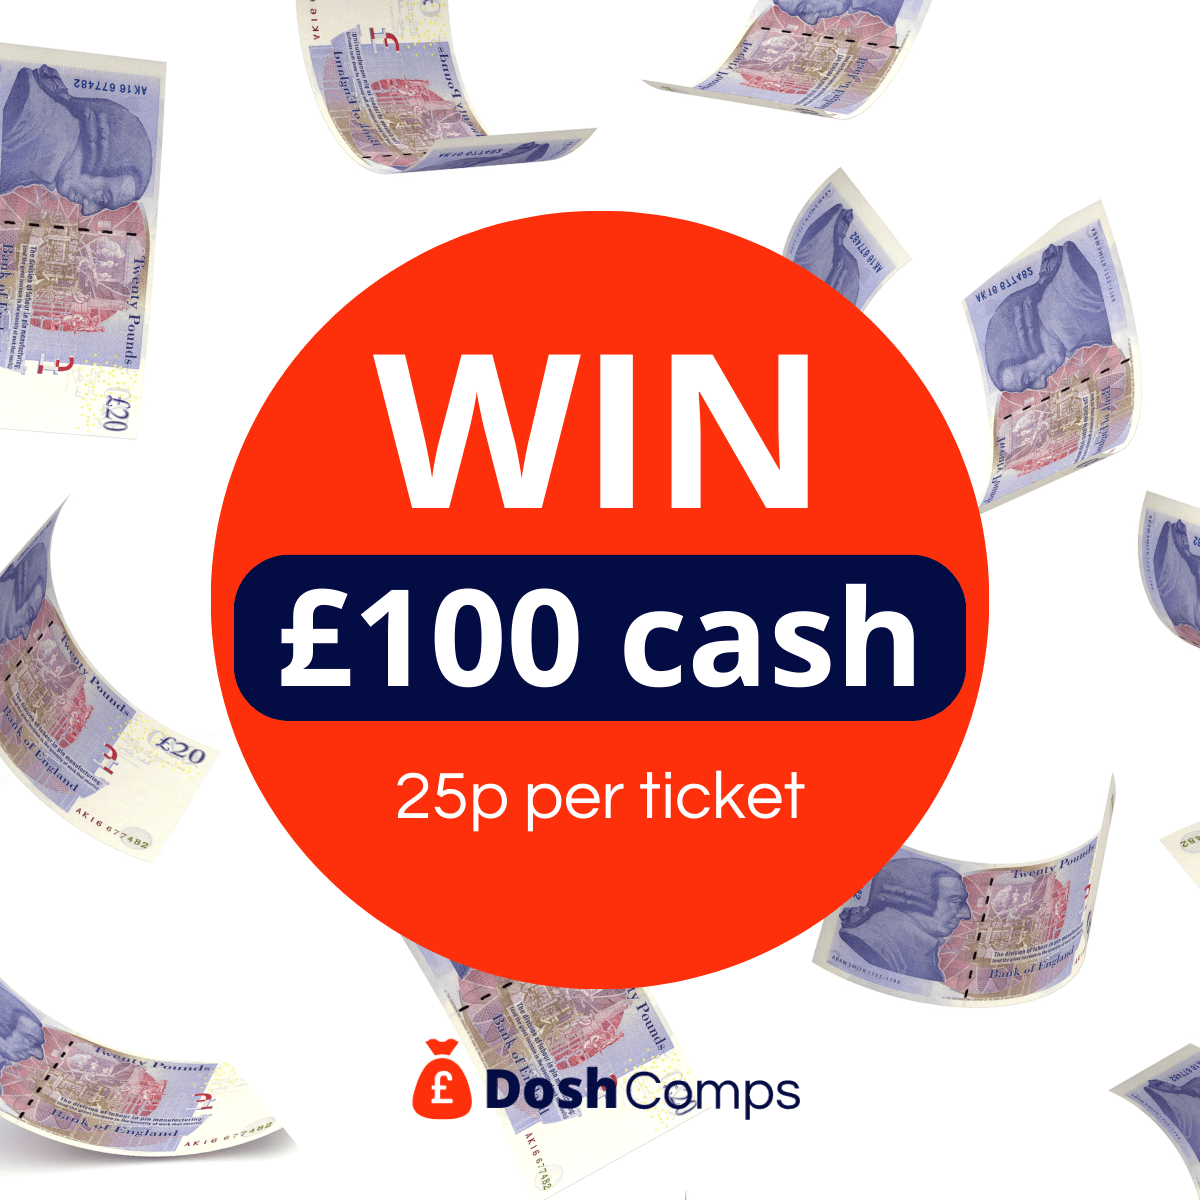 Win £100 for just 25p! 💸😀 Fantastic odds. 👍 Good luck 🍀 Tickets at 👉 doshcomps.co.uk #prizes #prizesuk #prizedraw #competitionuk #prizesuk #win #competitionwin #doshcomps